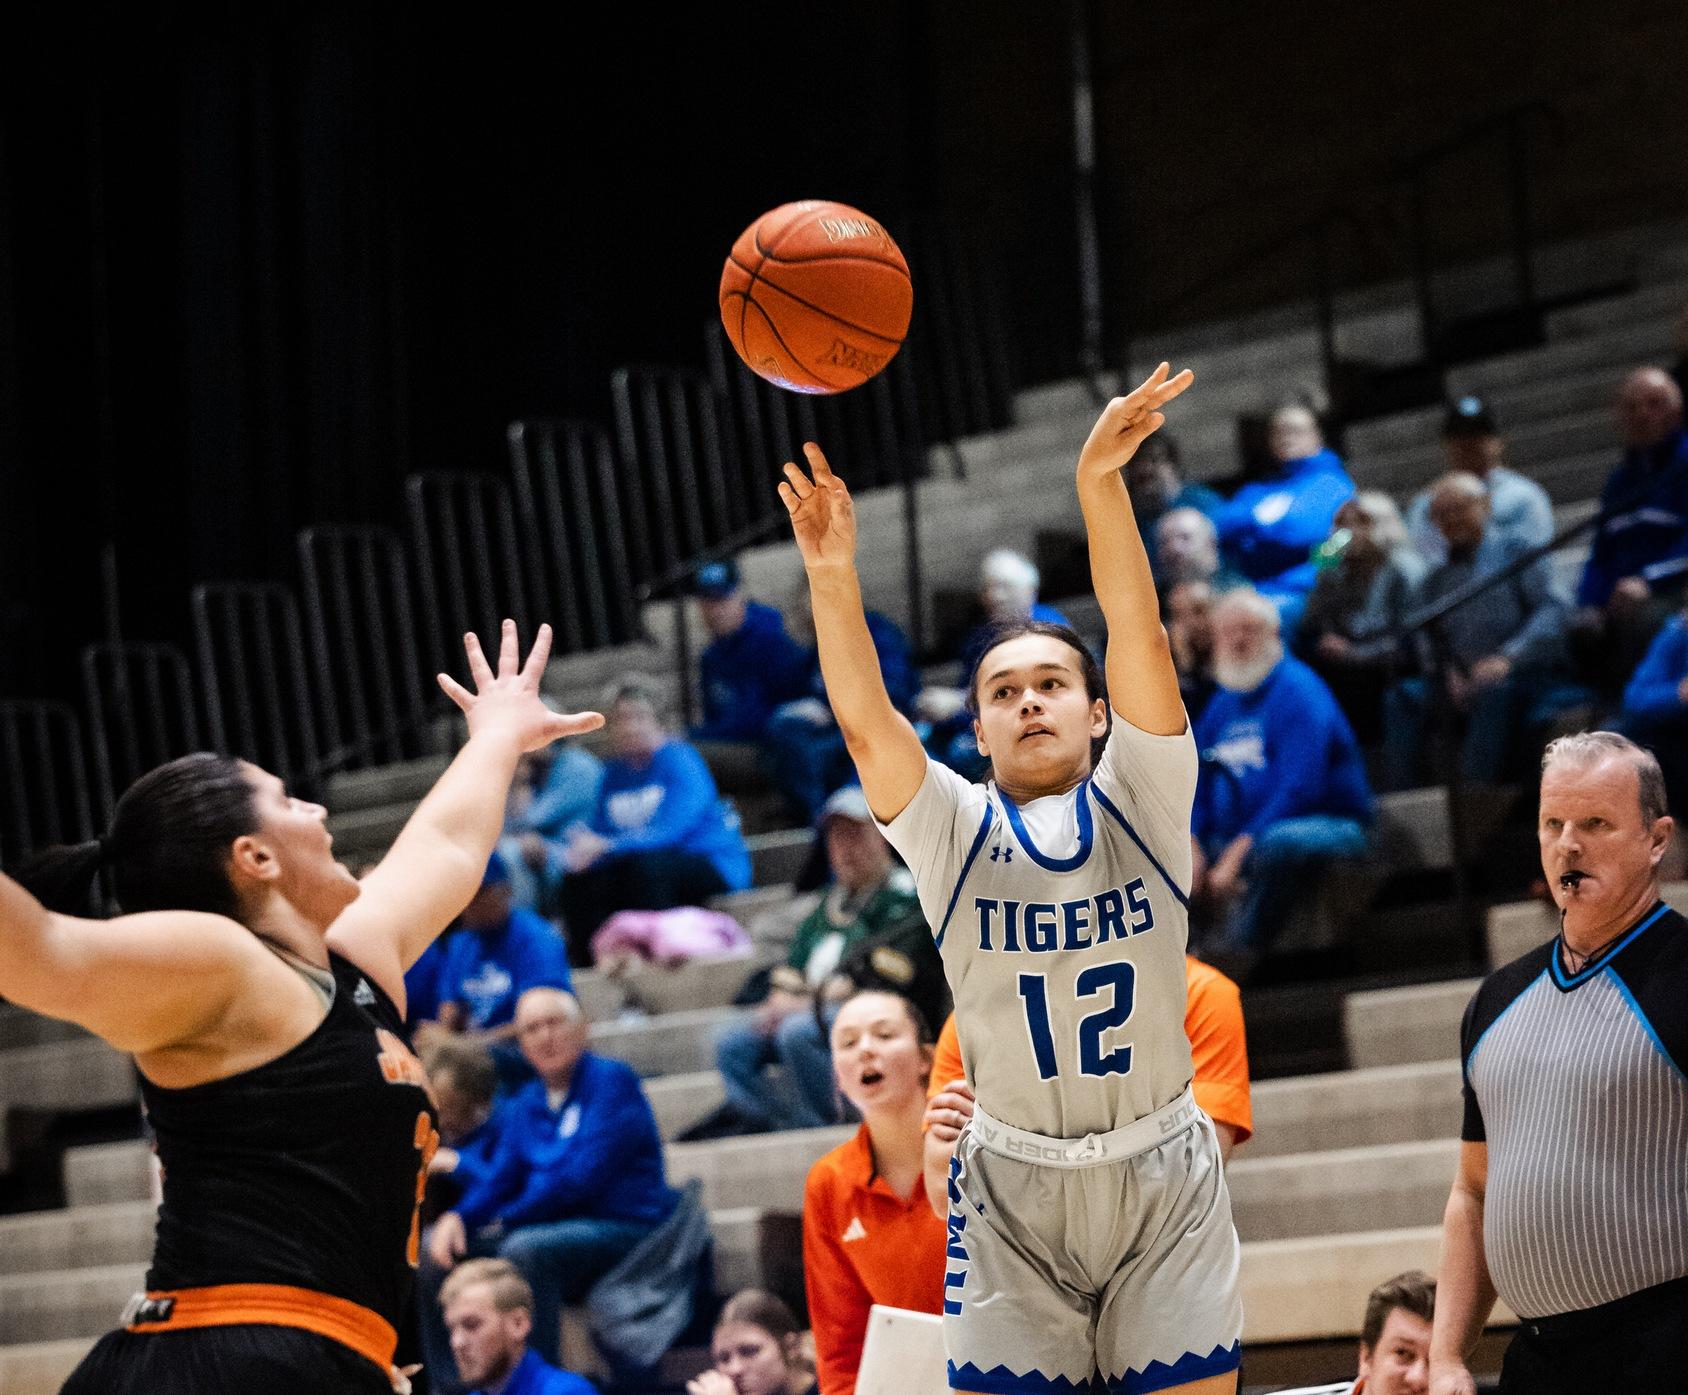 TIGERS MAKE IT 16 STRAIGHT AGAINST LANCERS BEHIND HAYES CAREER-HIGH 18 IN 76-50 WIN